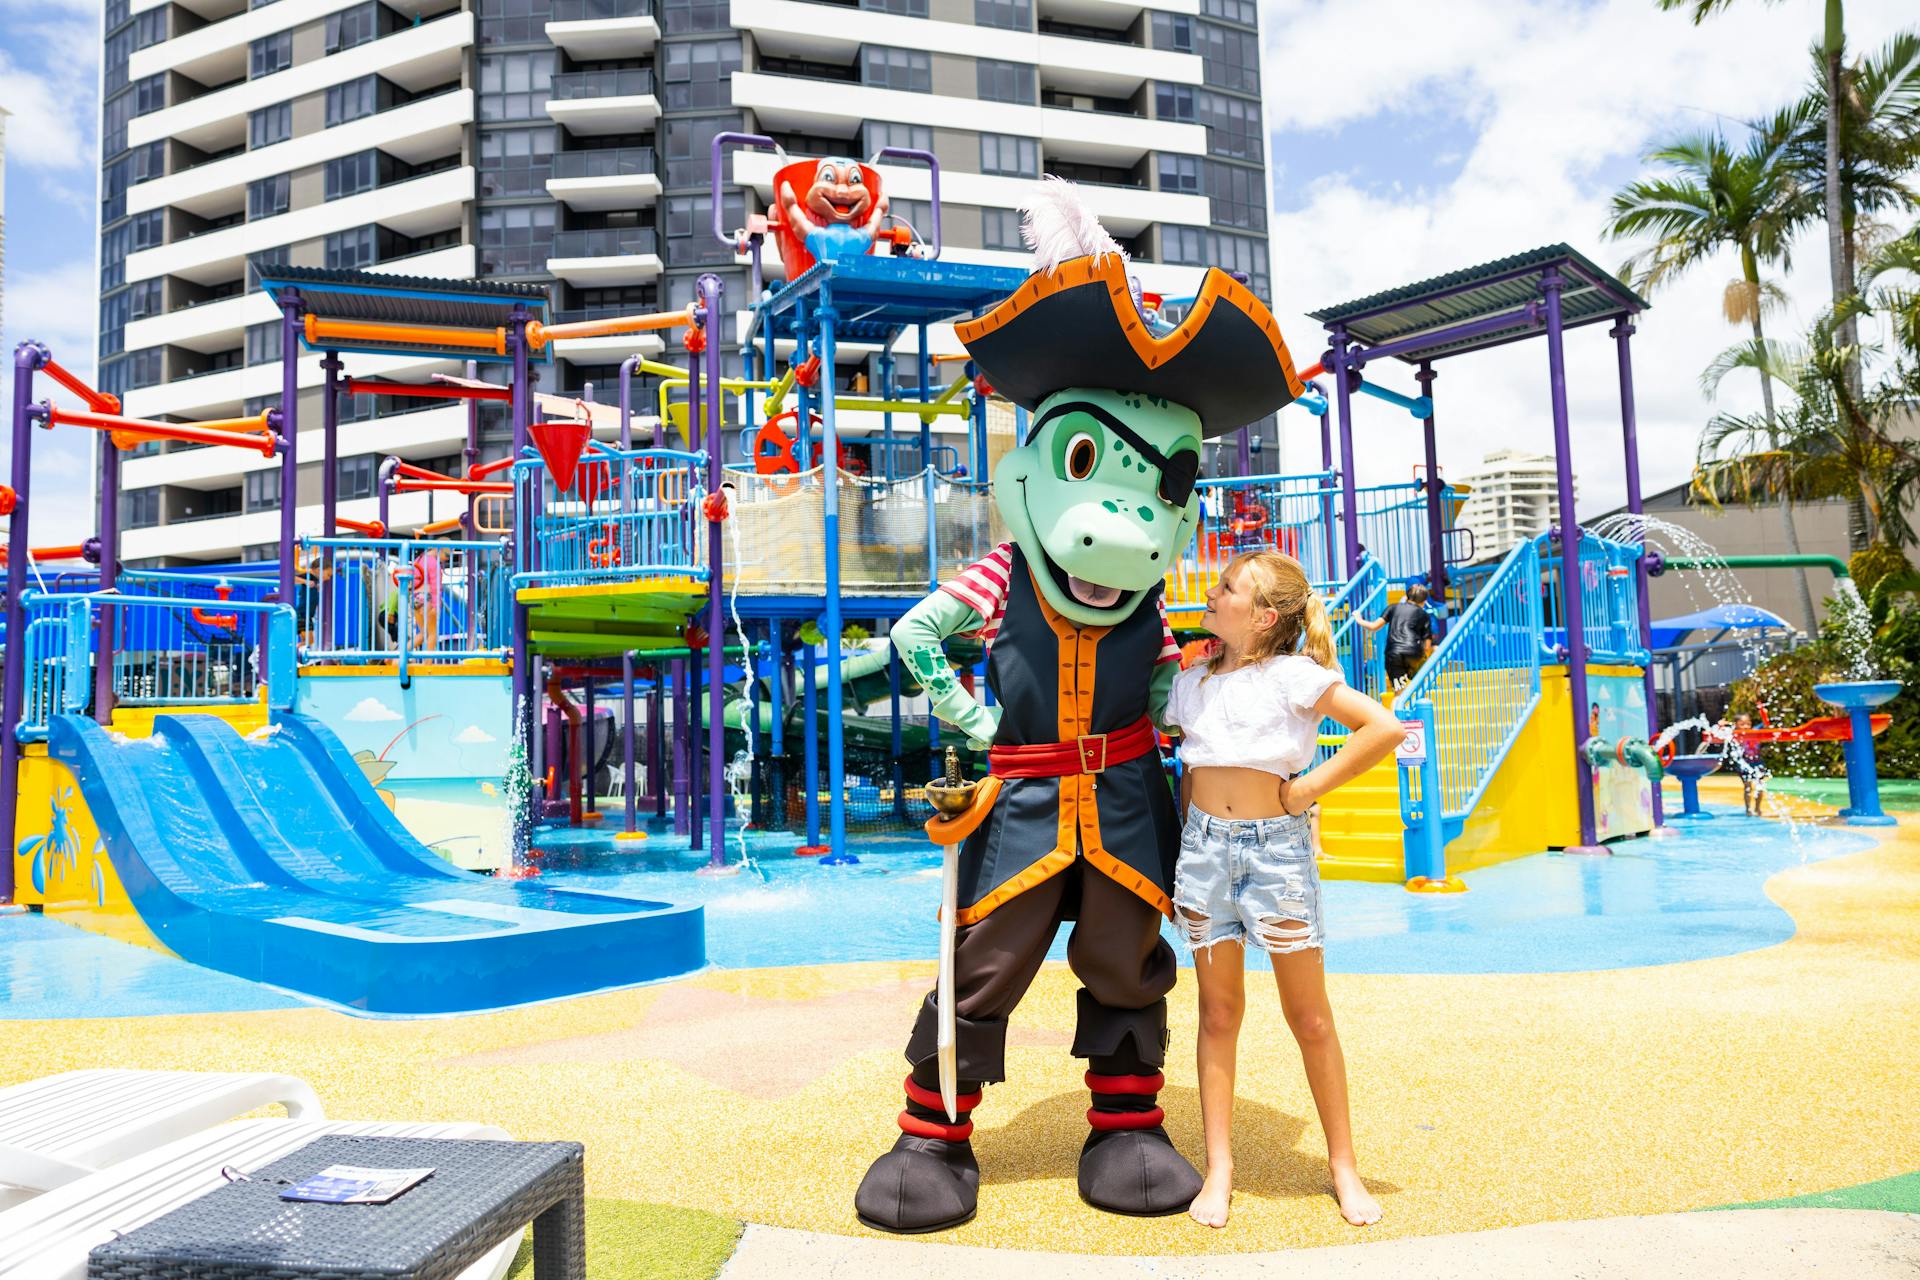 Resort mascot Captain posing with a guest in front of the expansive waterpark.